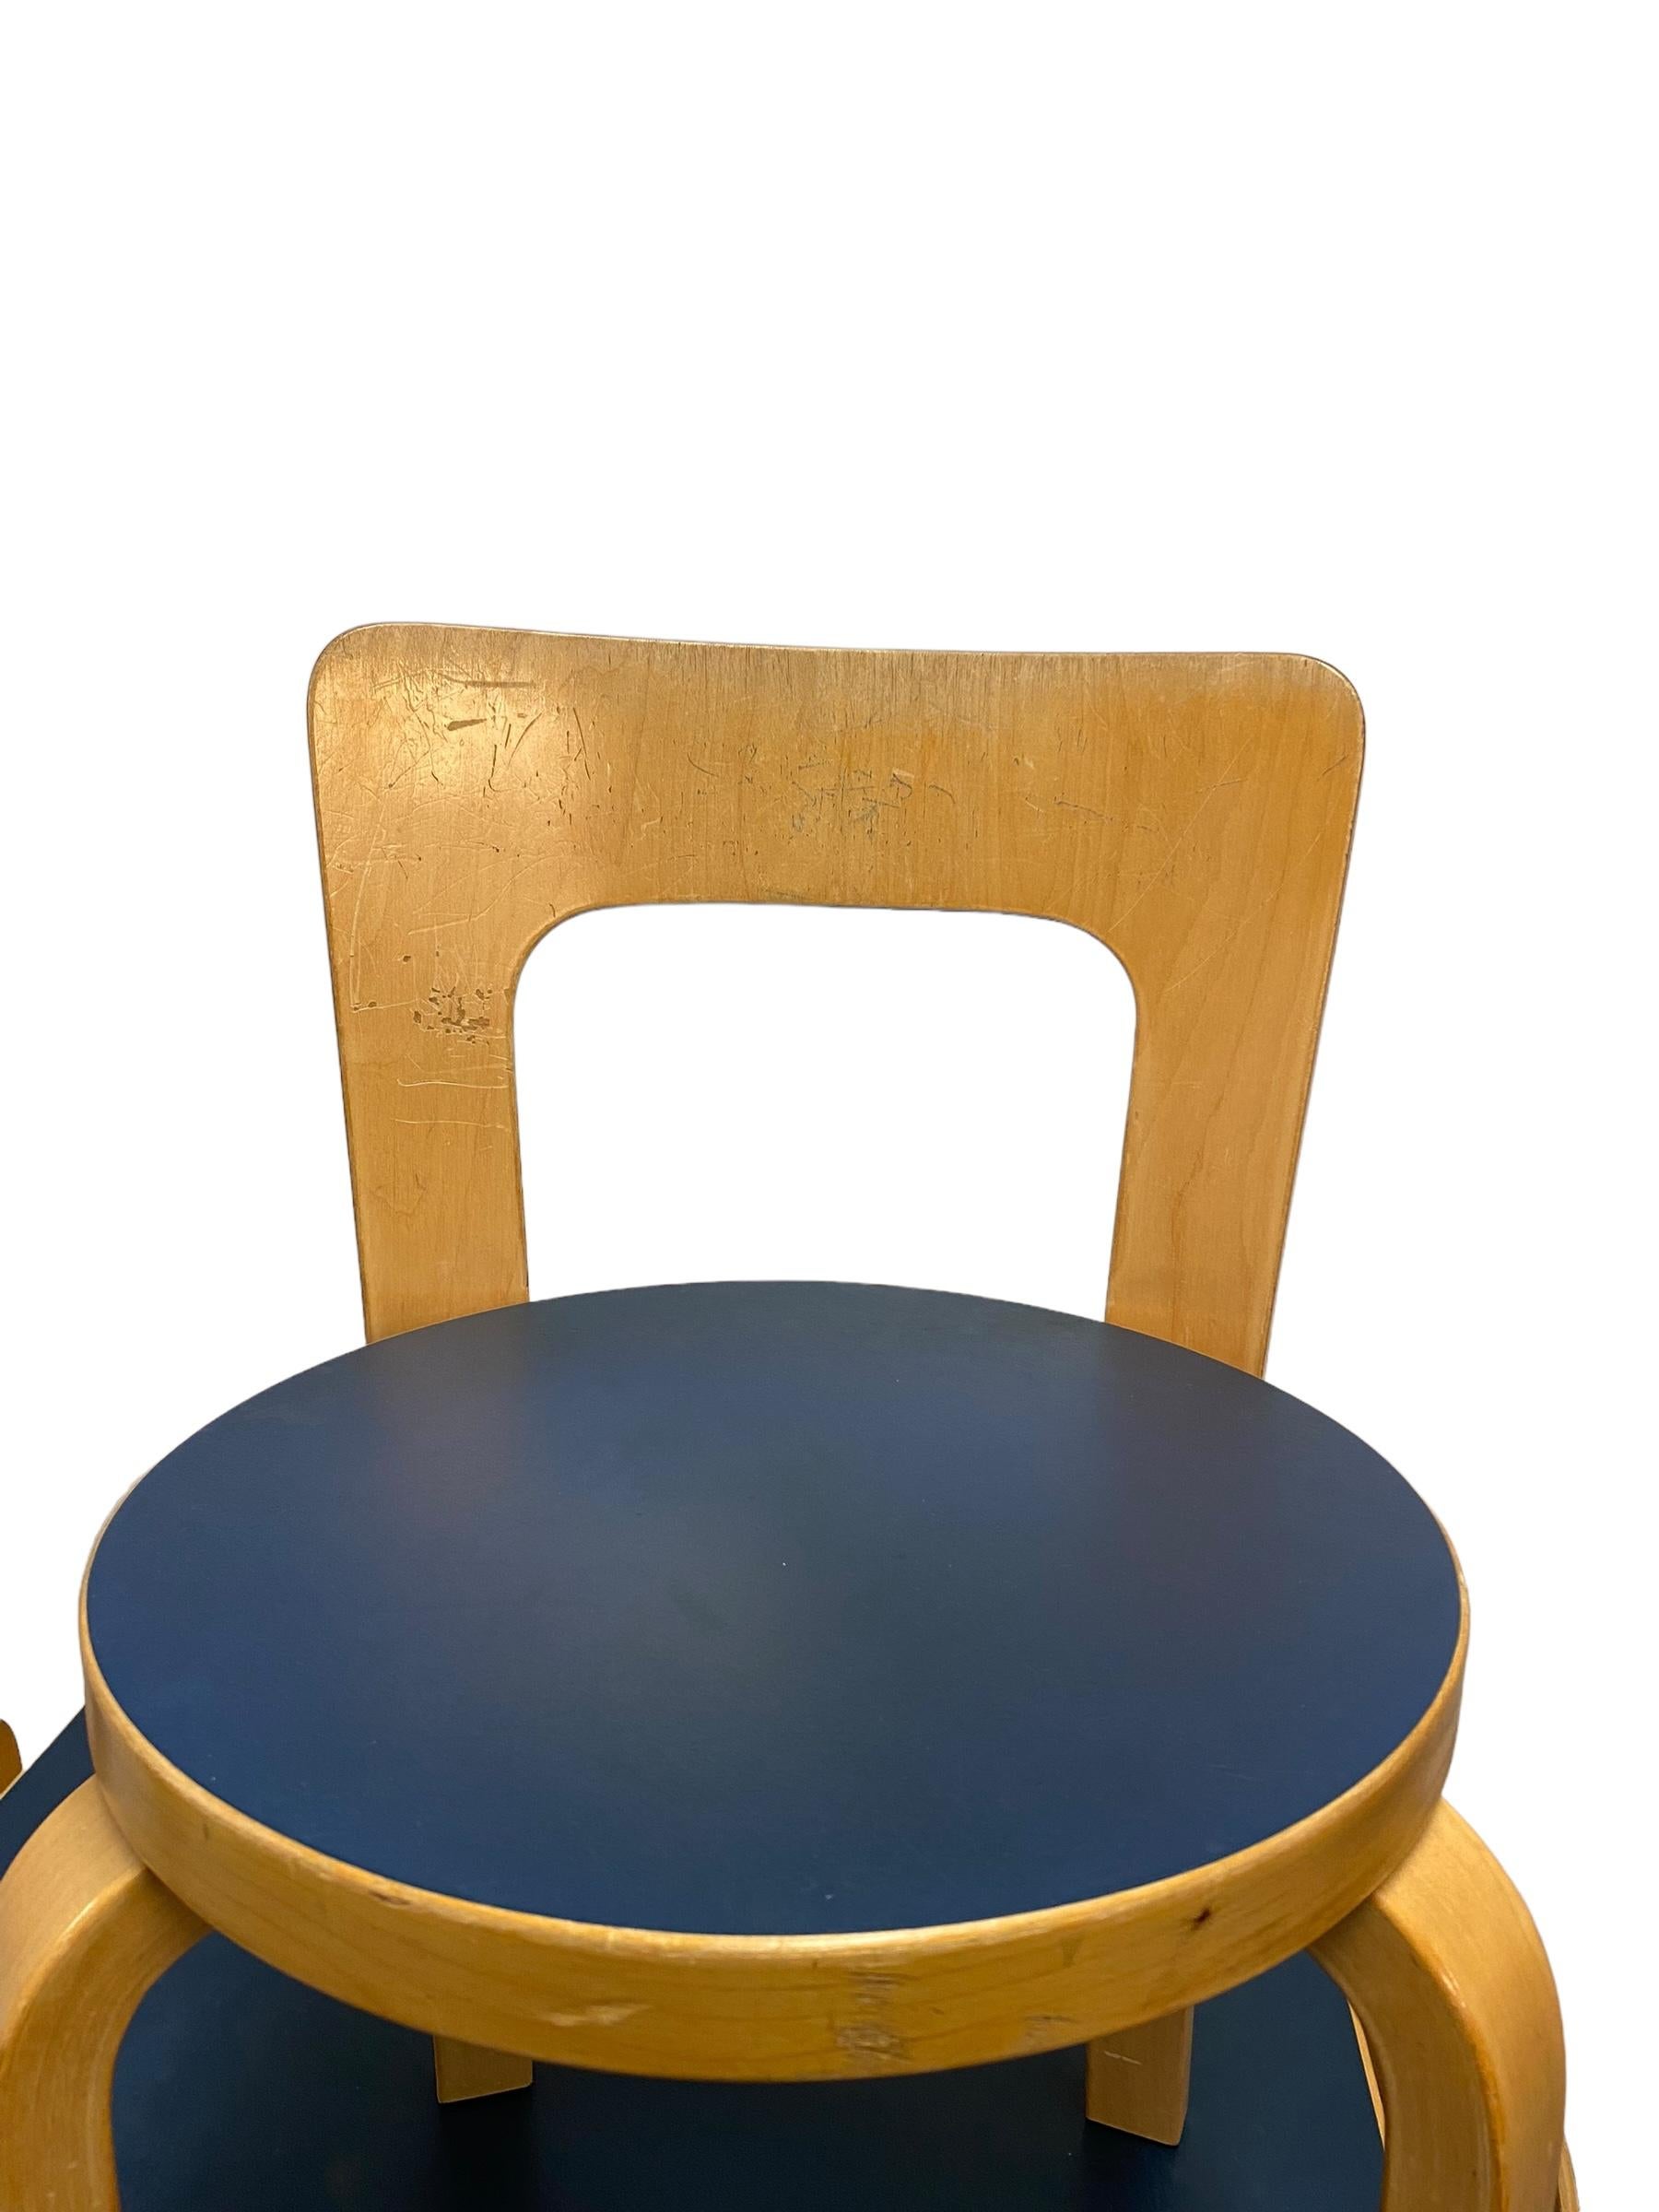 Finnish Alvar Aalto Table & 5 Model 65 Chairs In Blue Laminate, 1960s For Sale